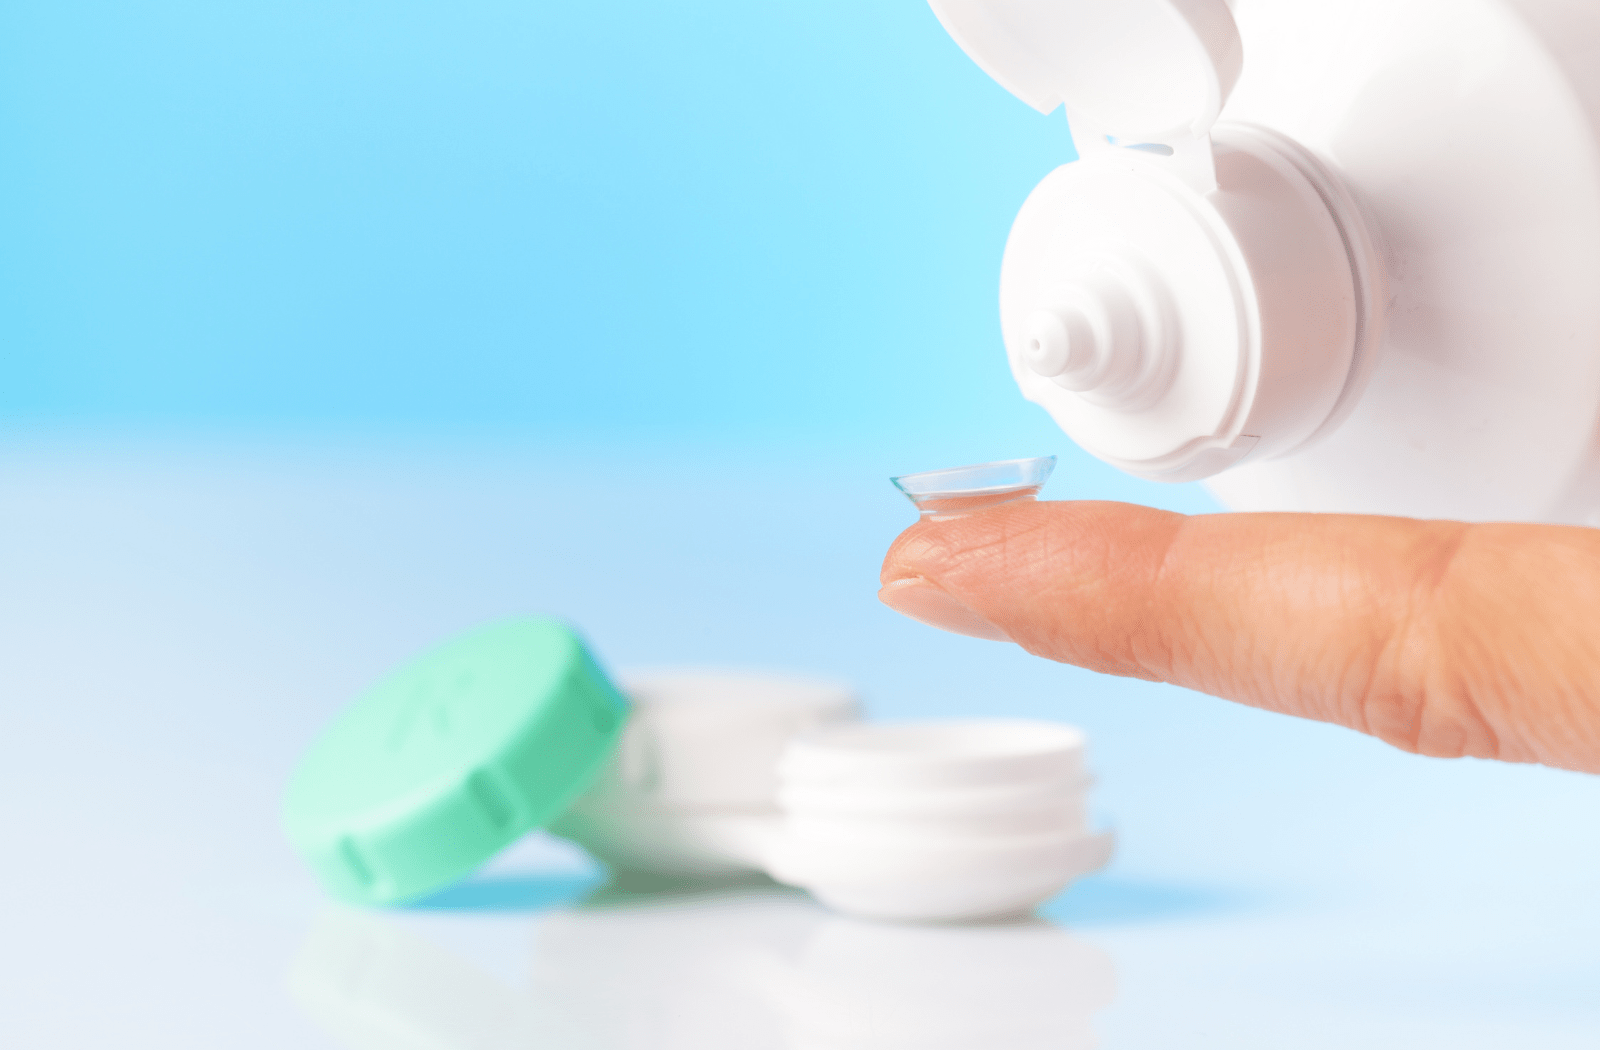 A person holding a contact lens on their index finger and they are pouring contact lens solution onto the contact with the case in the background